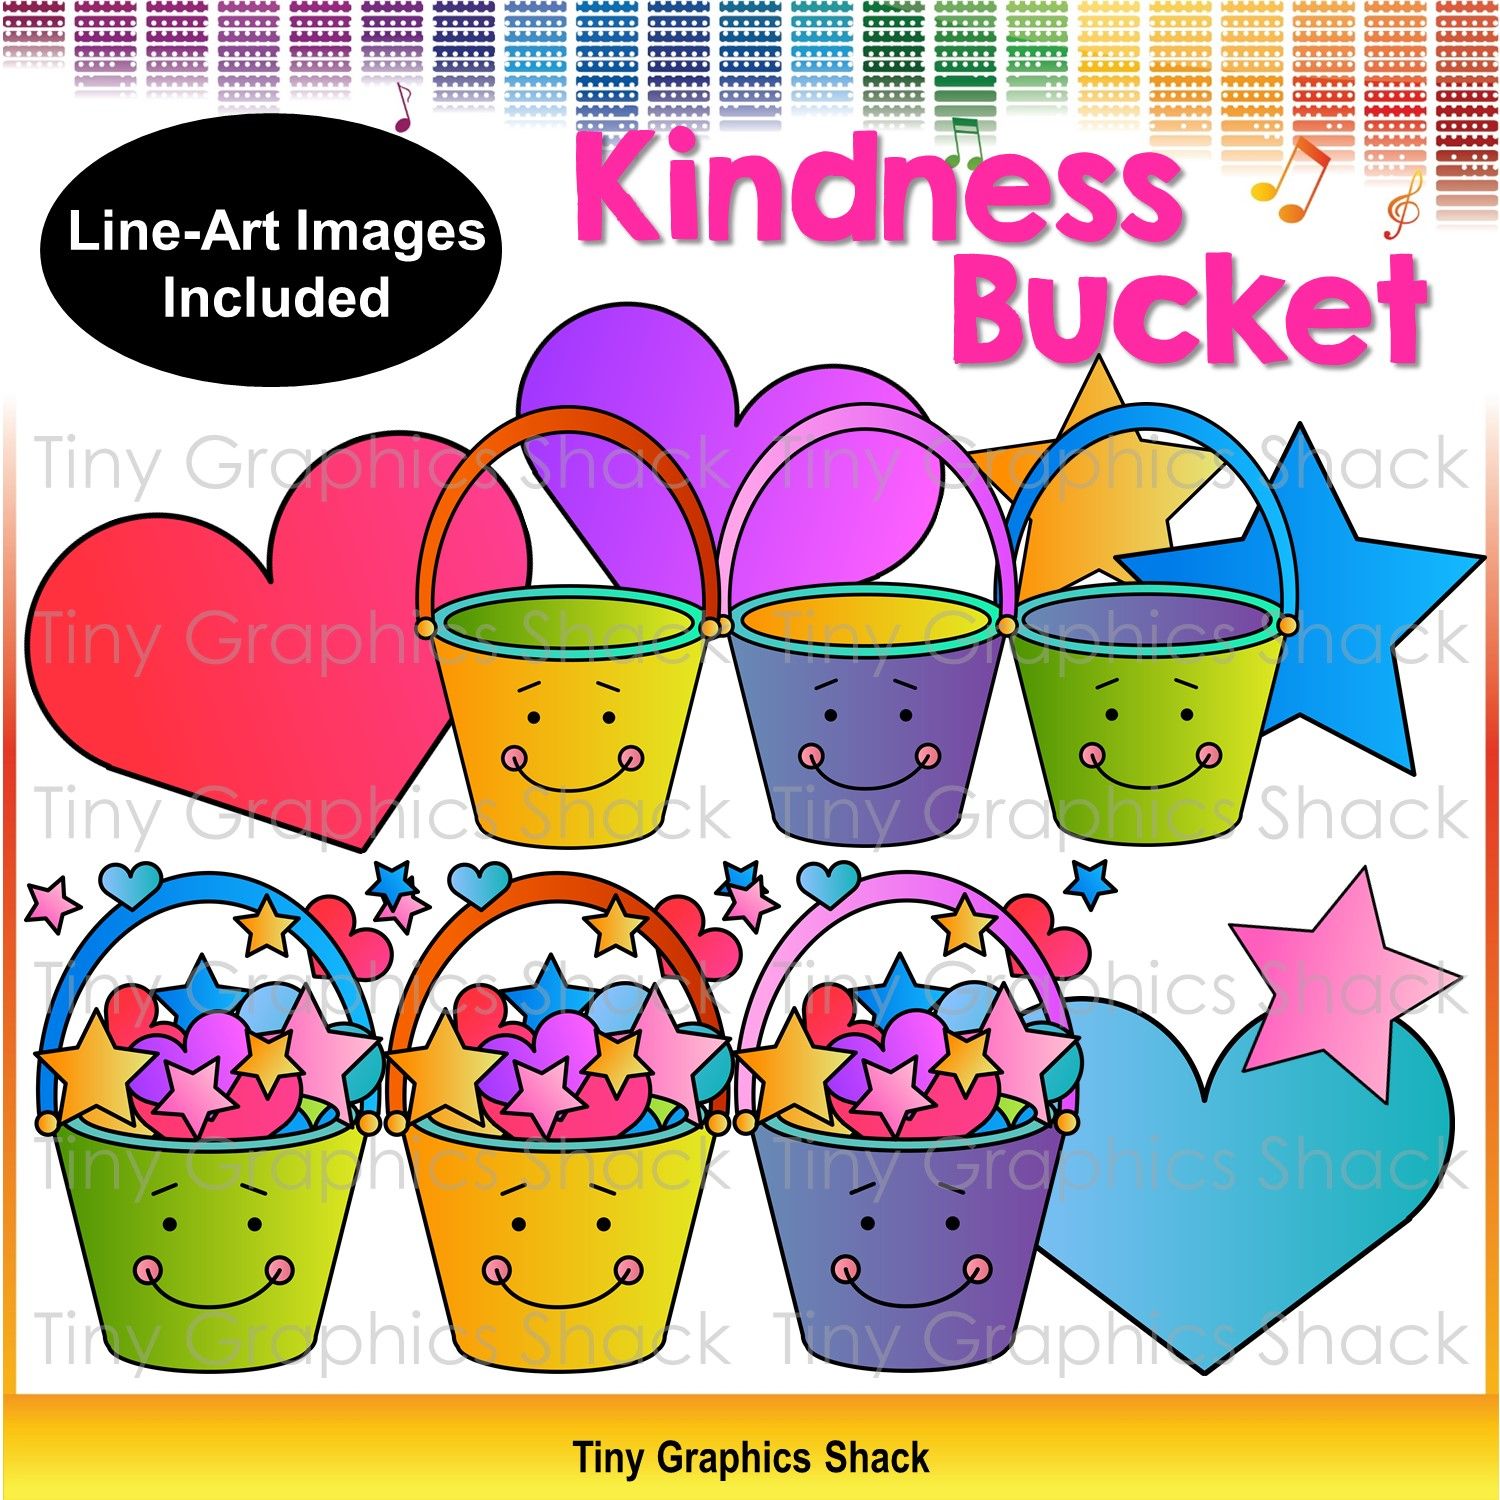 kindness clipart gives